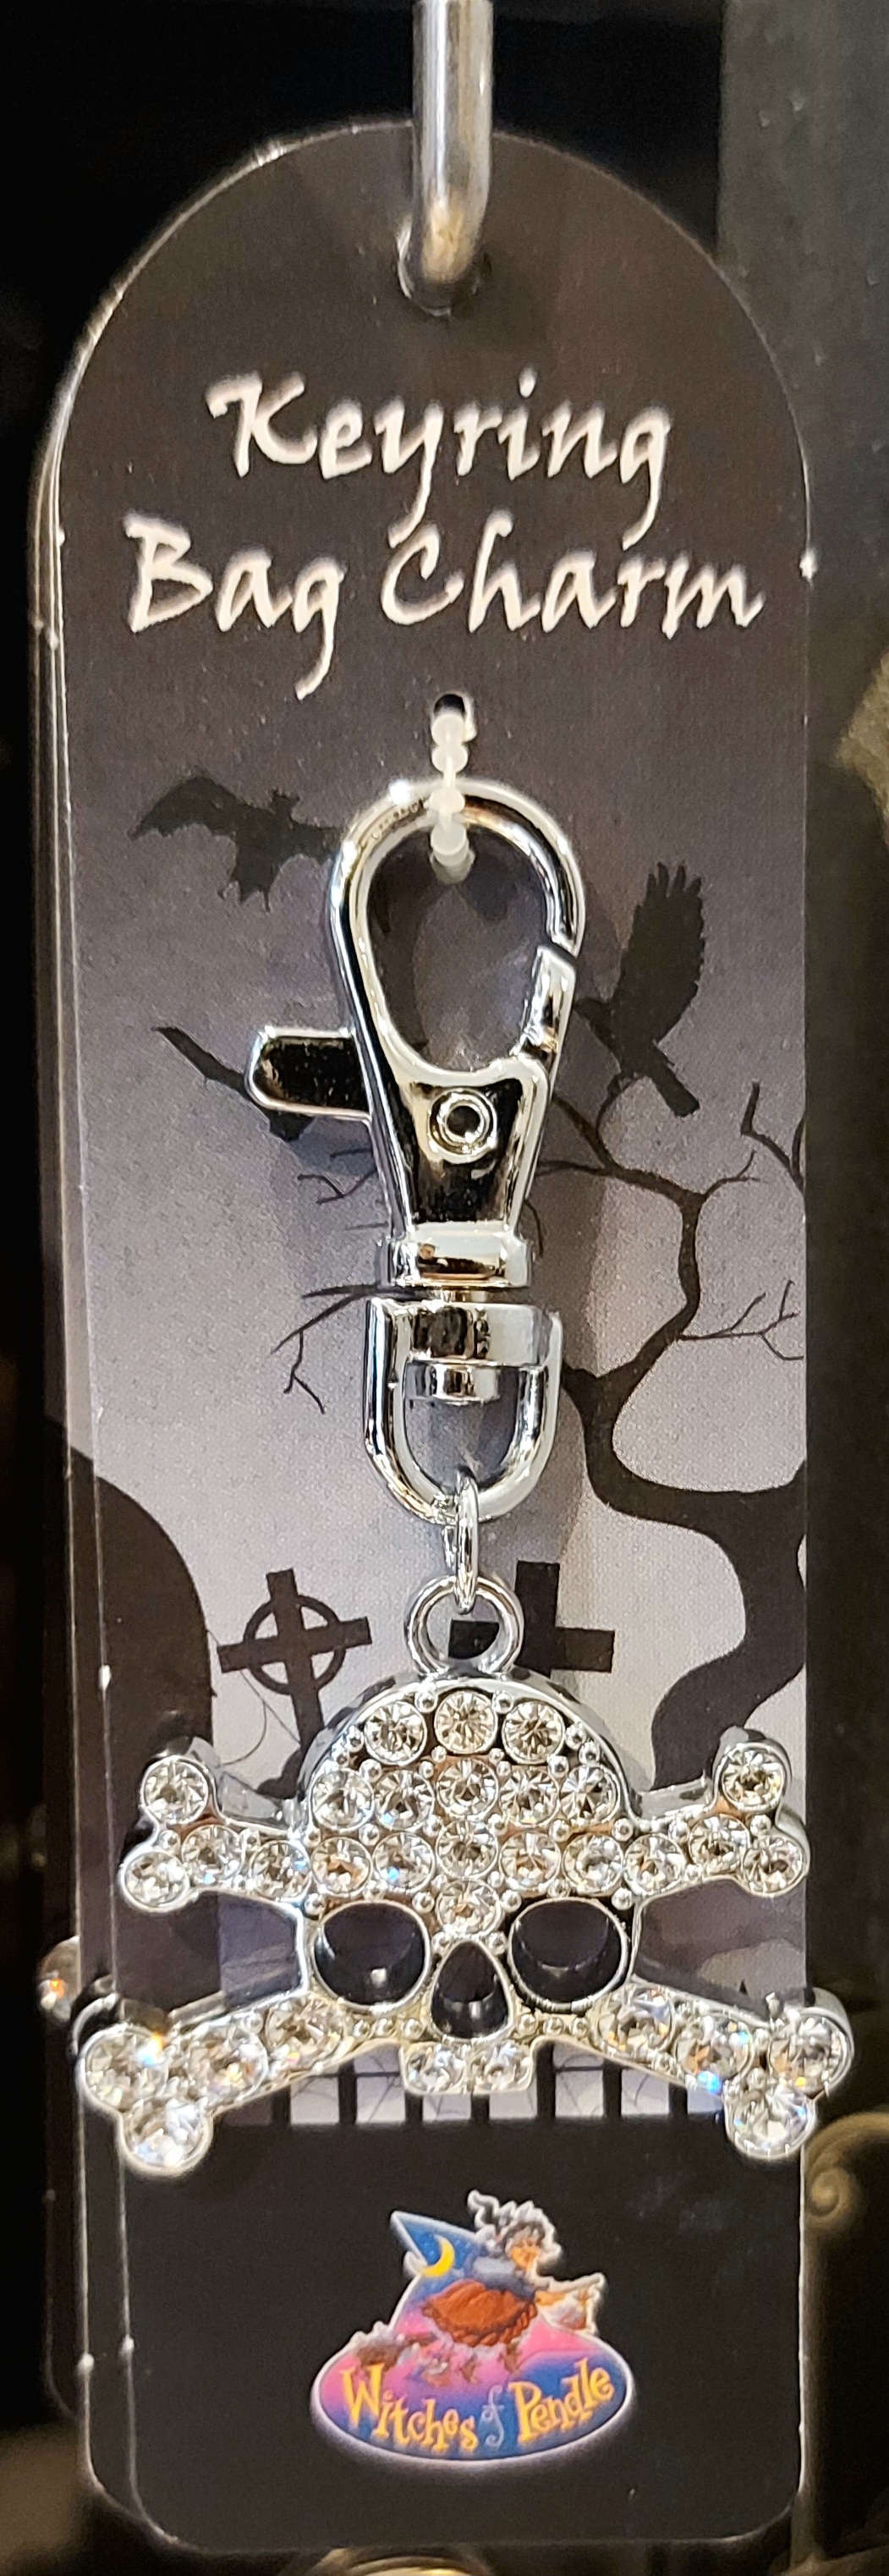 Witches of pendle diamante bag charm/keyring skull & crossbones